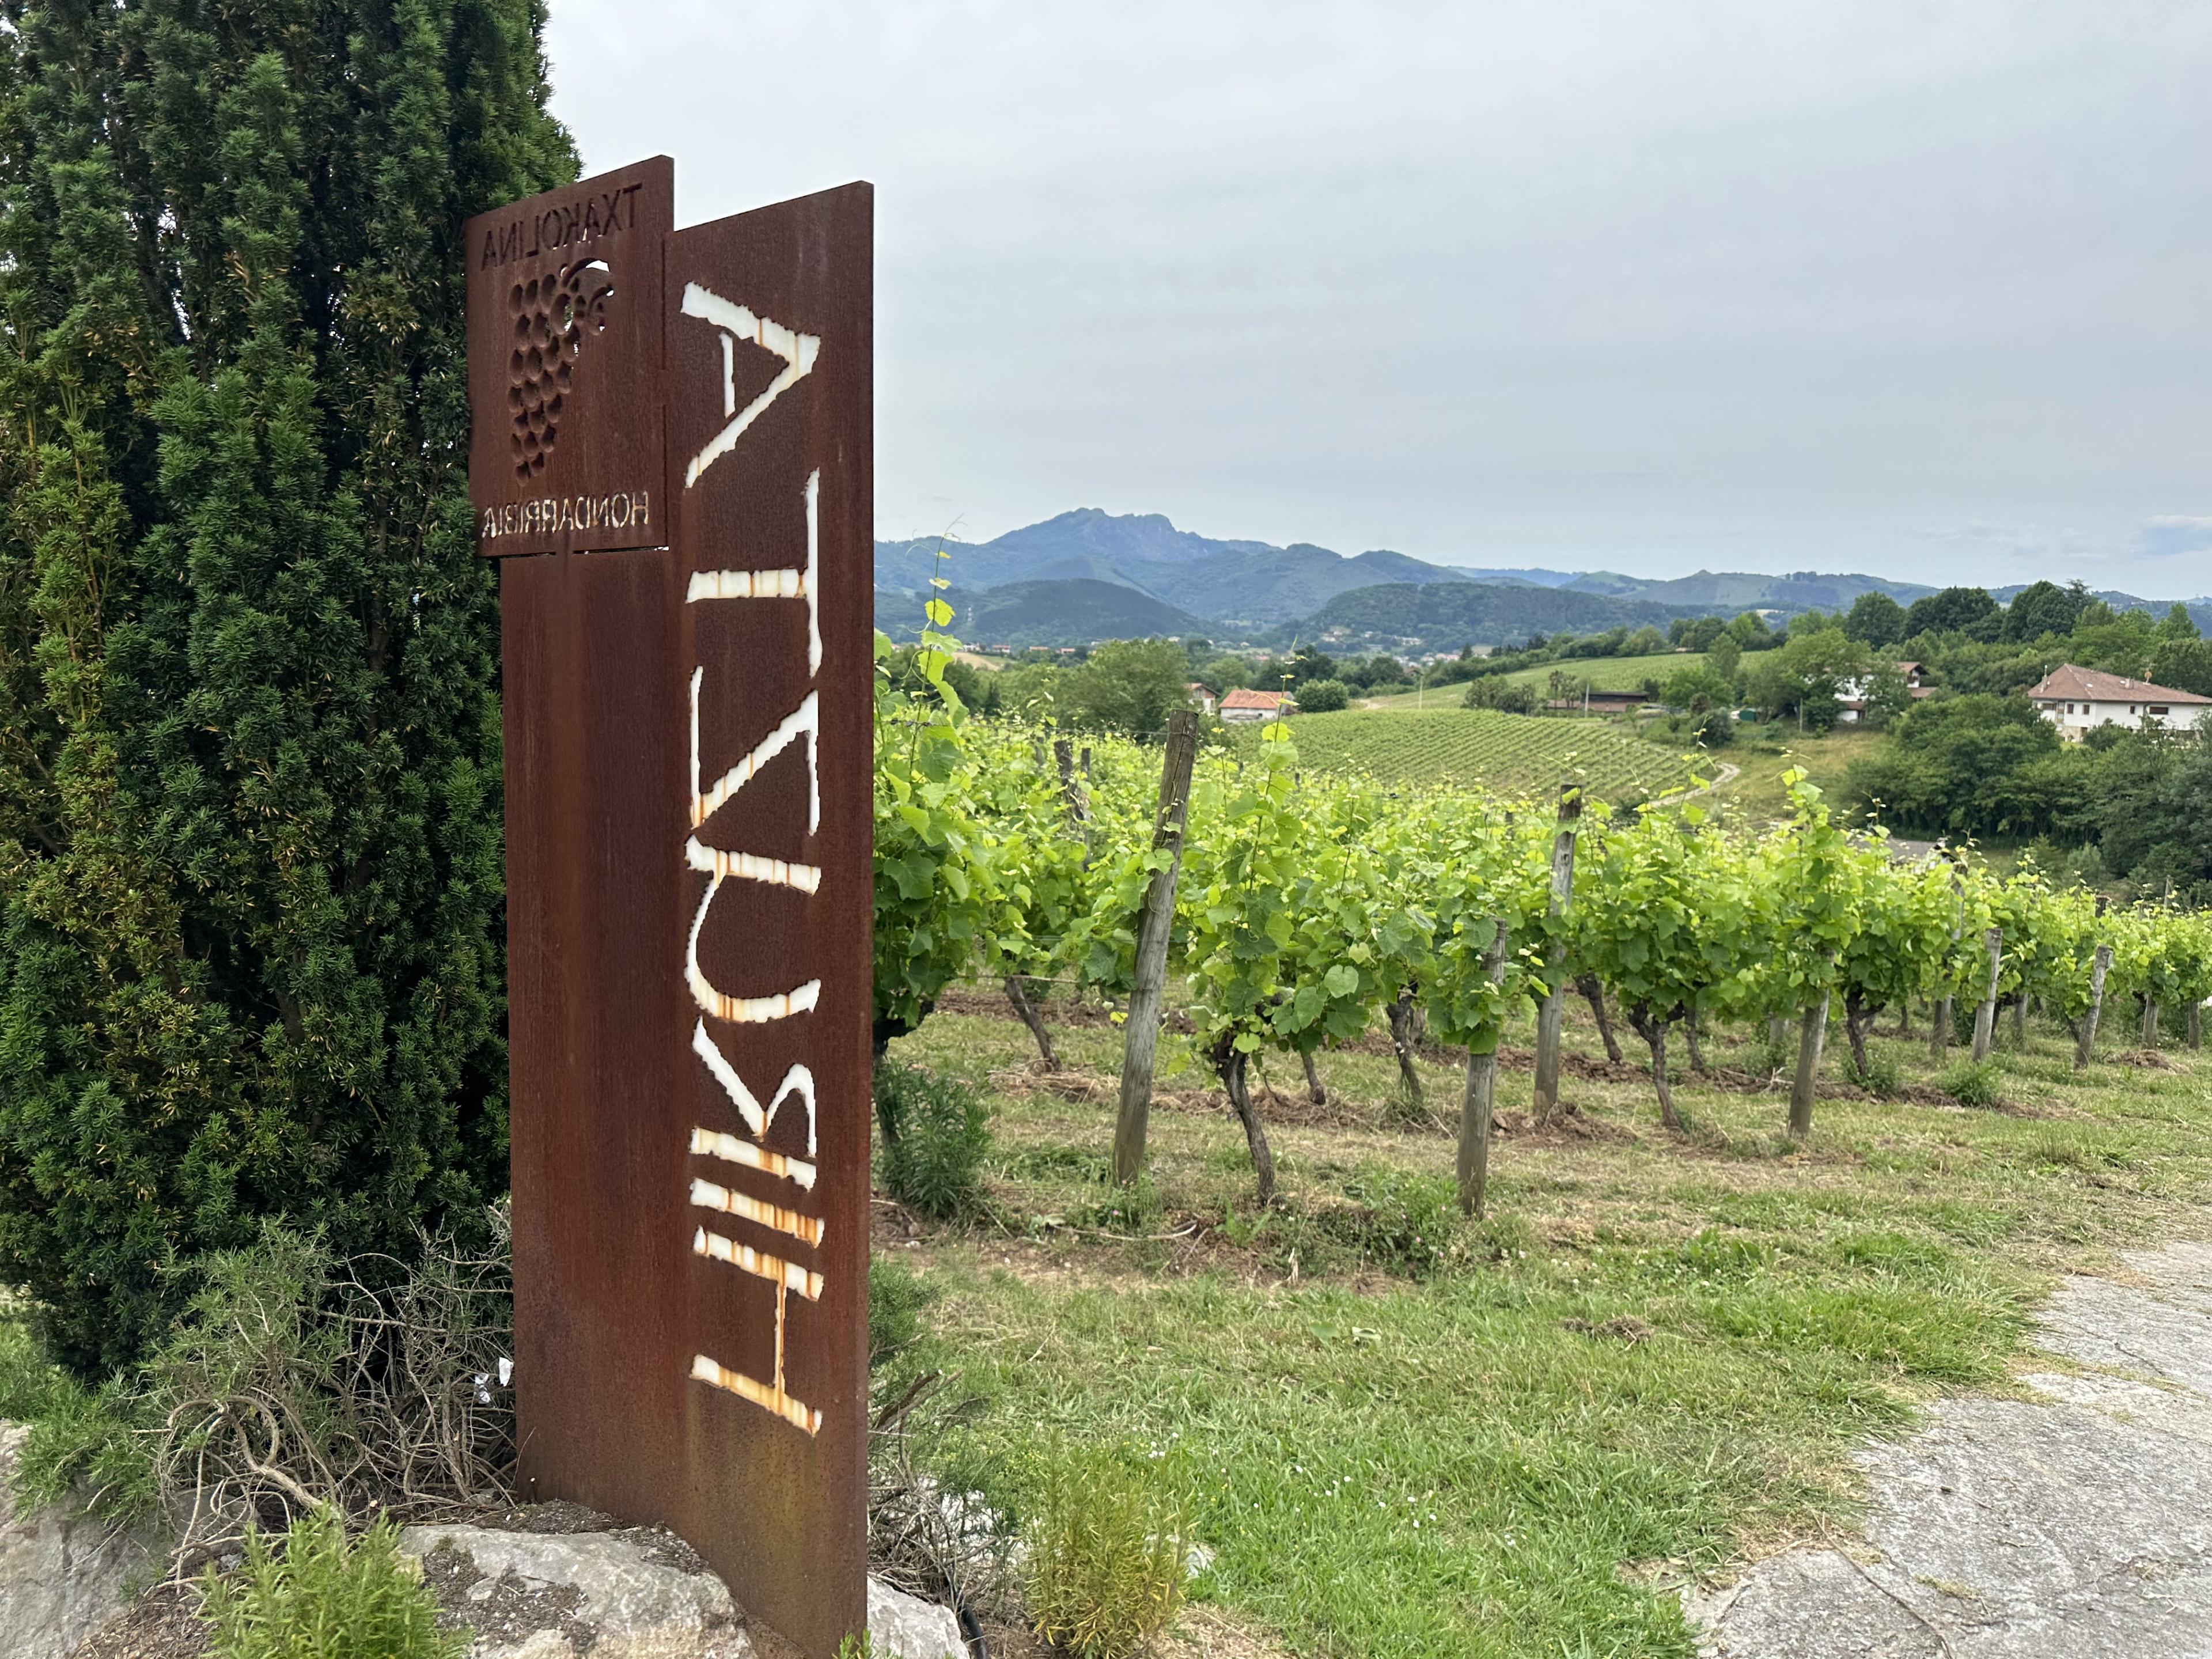 vertical wooden sign in a winery